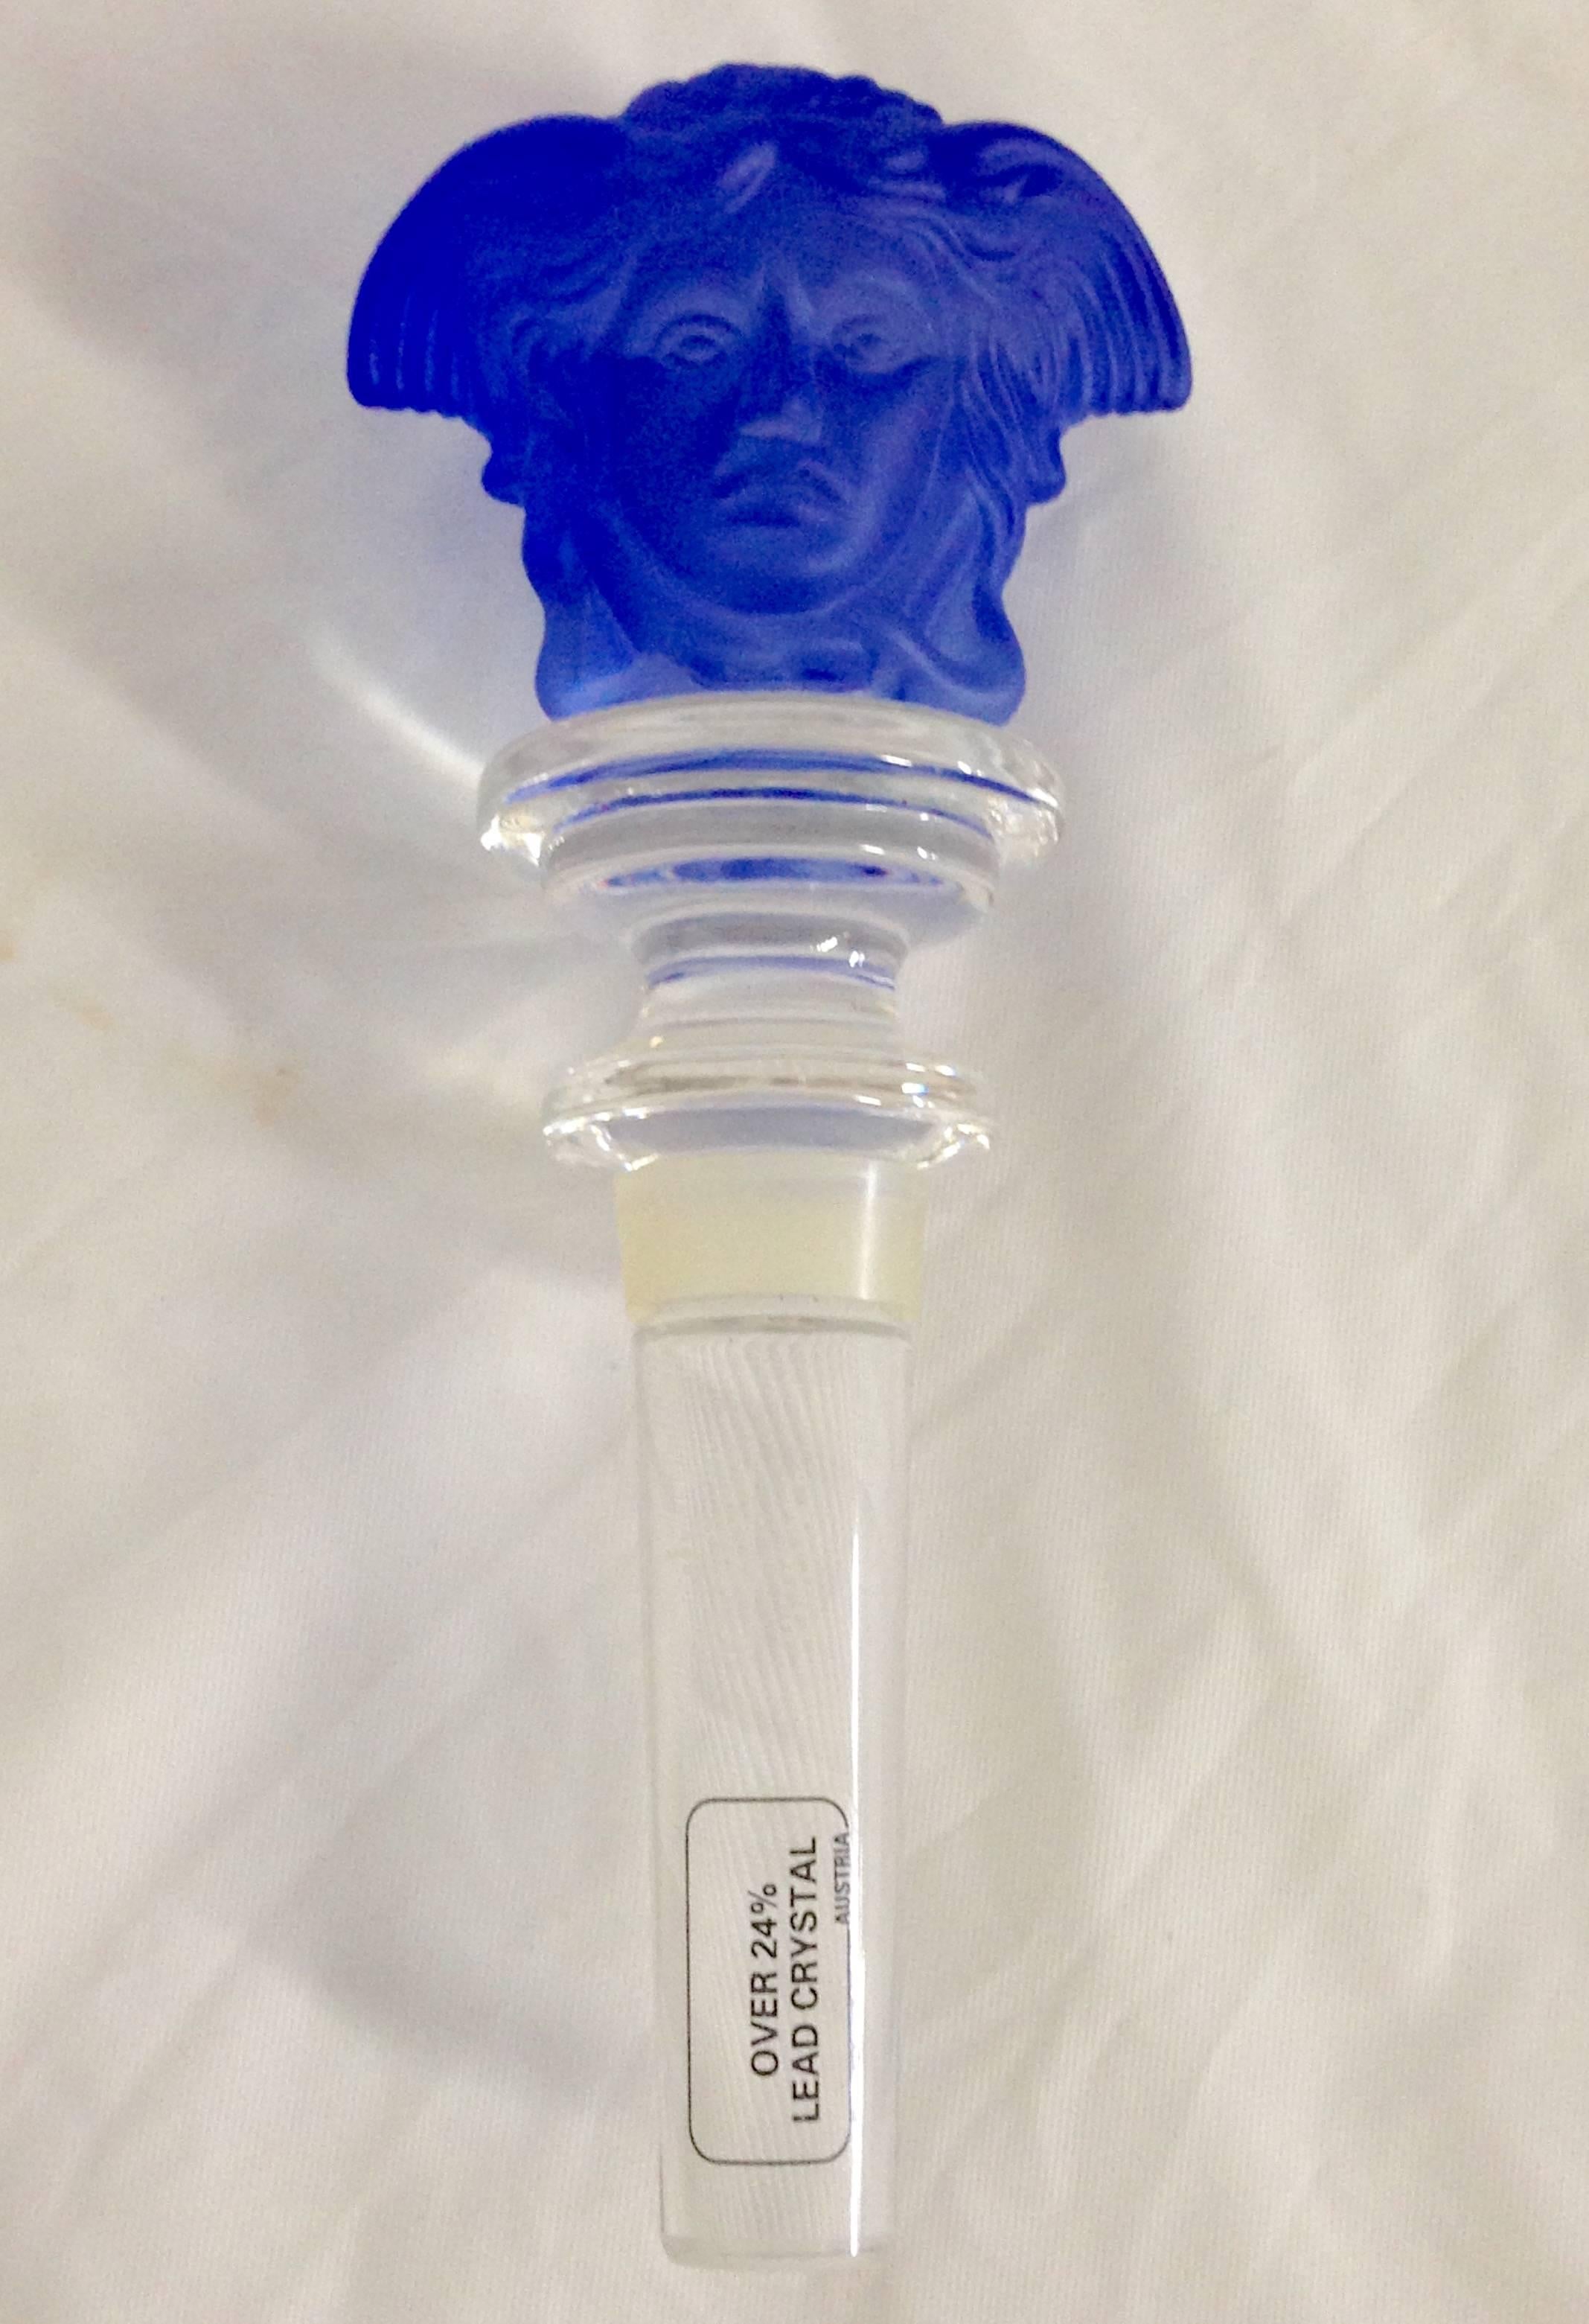 Gorgeous electric blue crystal medusa bottle stopper by Versace. New in original protective gift box and original manufacture sticker present.